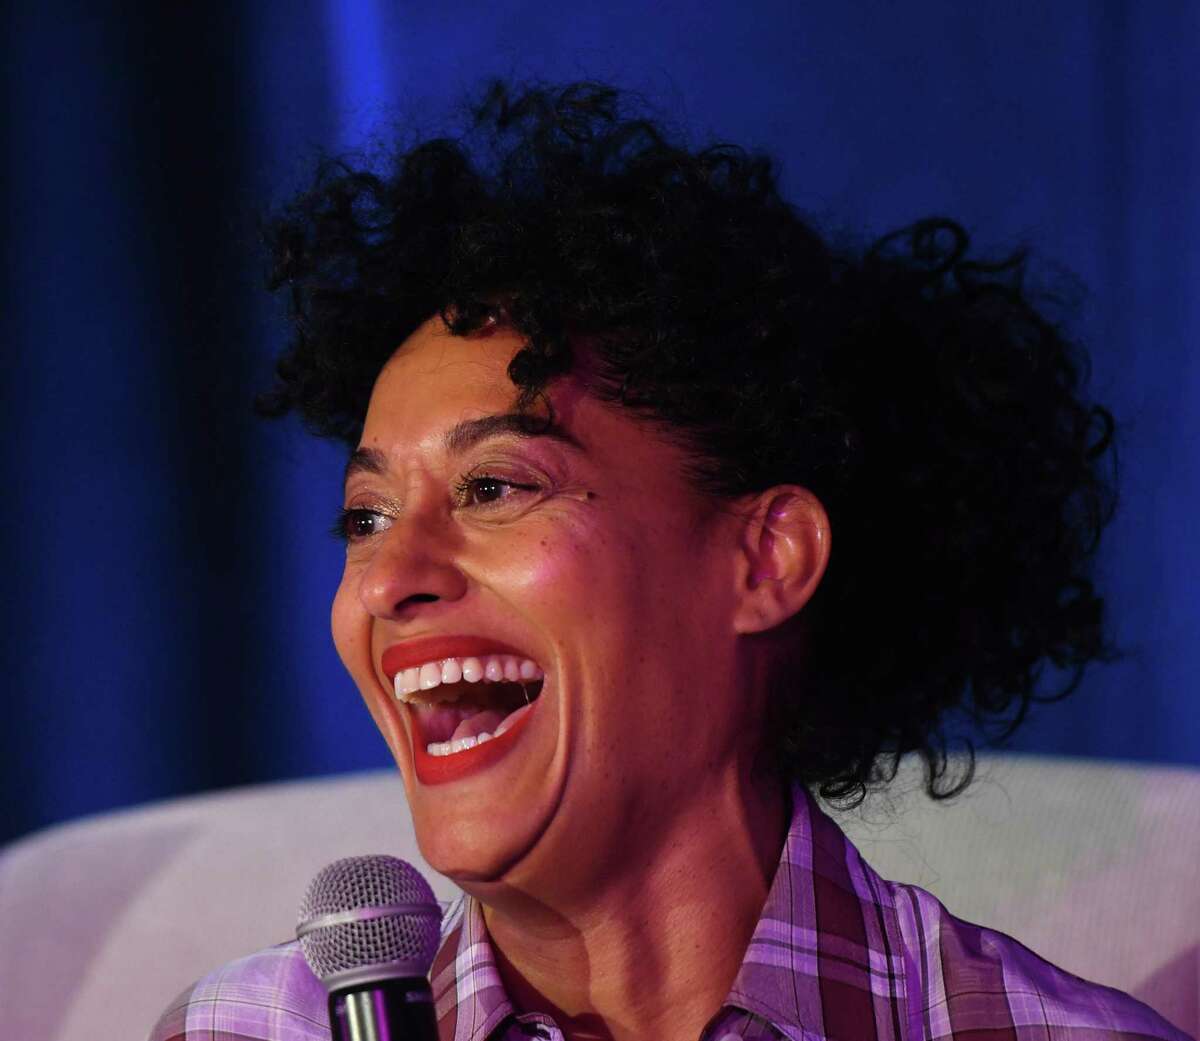 Actress, producer and activist Tracee Ellis Ross delivers the keynote conversation "Brave, Bold, You" during Fairfield County's Community Foundation Fund for Women & Girls annual luncheon at the Hyatt Regency in Old Greenwich, Conn. Thursday, April 4, 2019. Ross is known for her lead role on ABC's "black-ish" and has won a Golden Globe along with several NAACP Image Awards for her work.